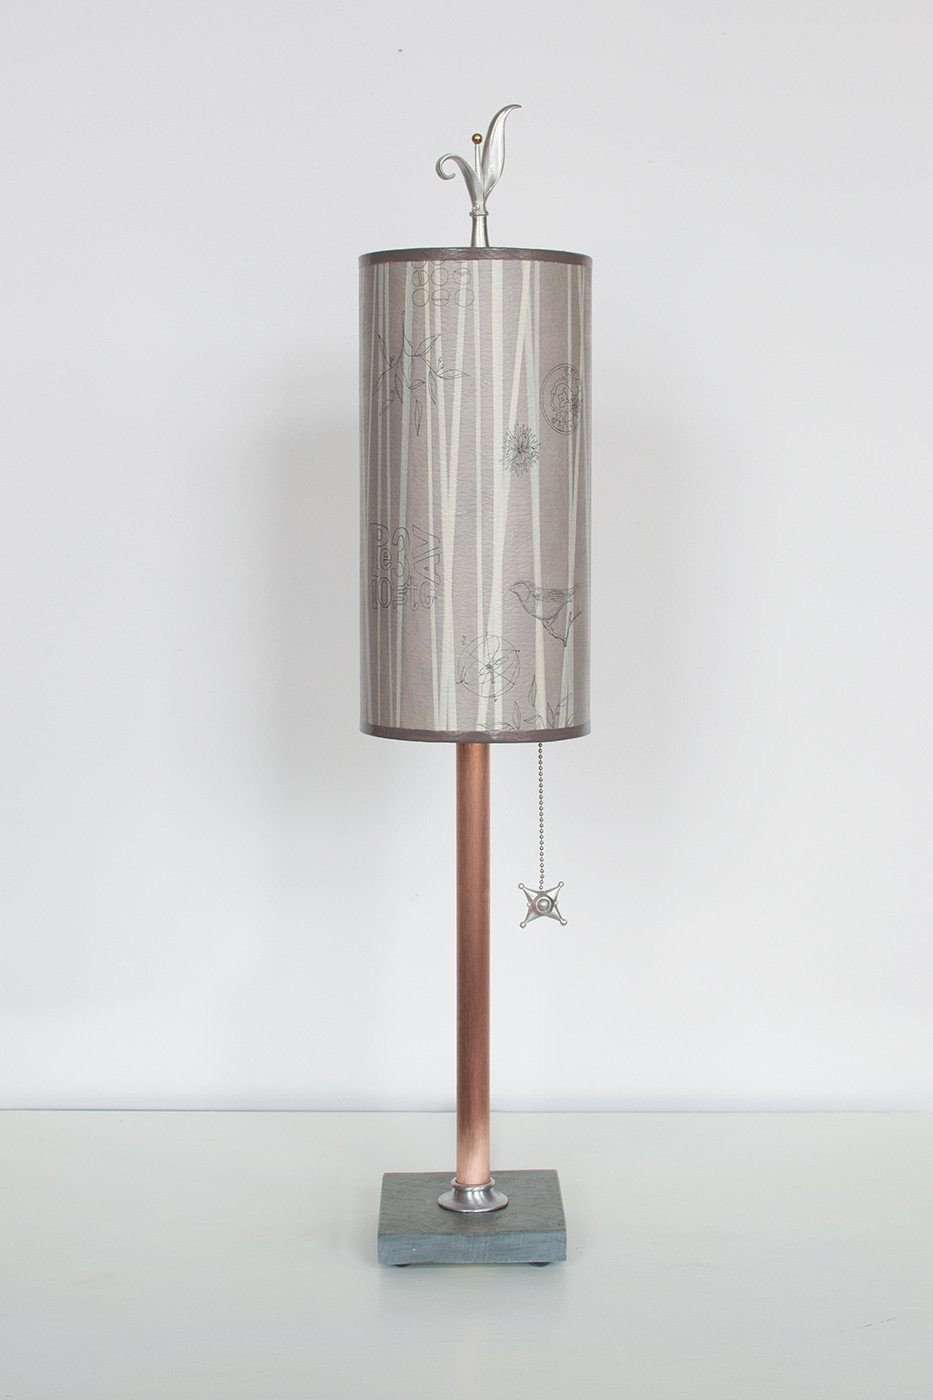 Copper Table Lamp with Small Tube Shade in Birch Lines